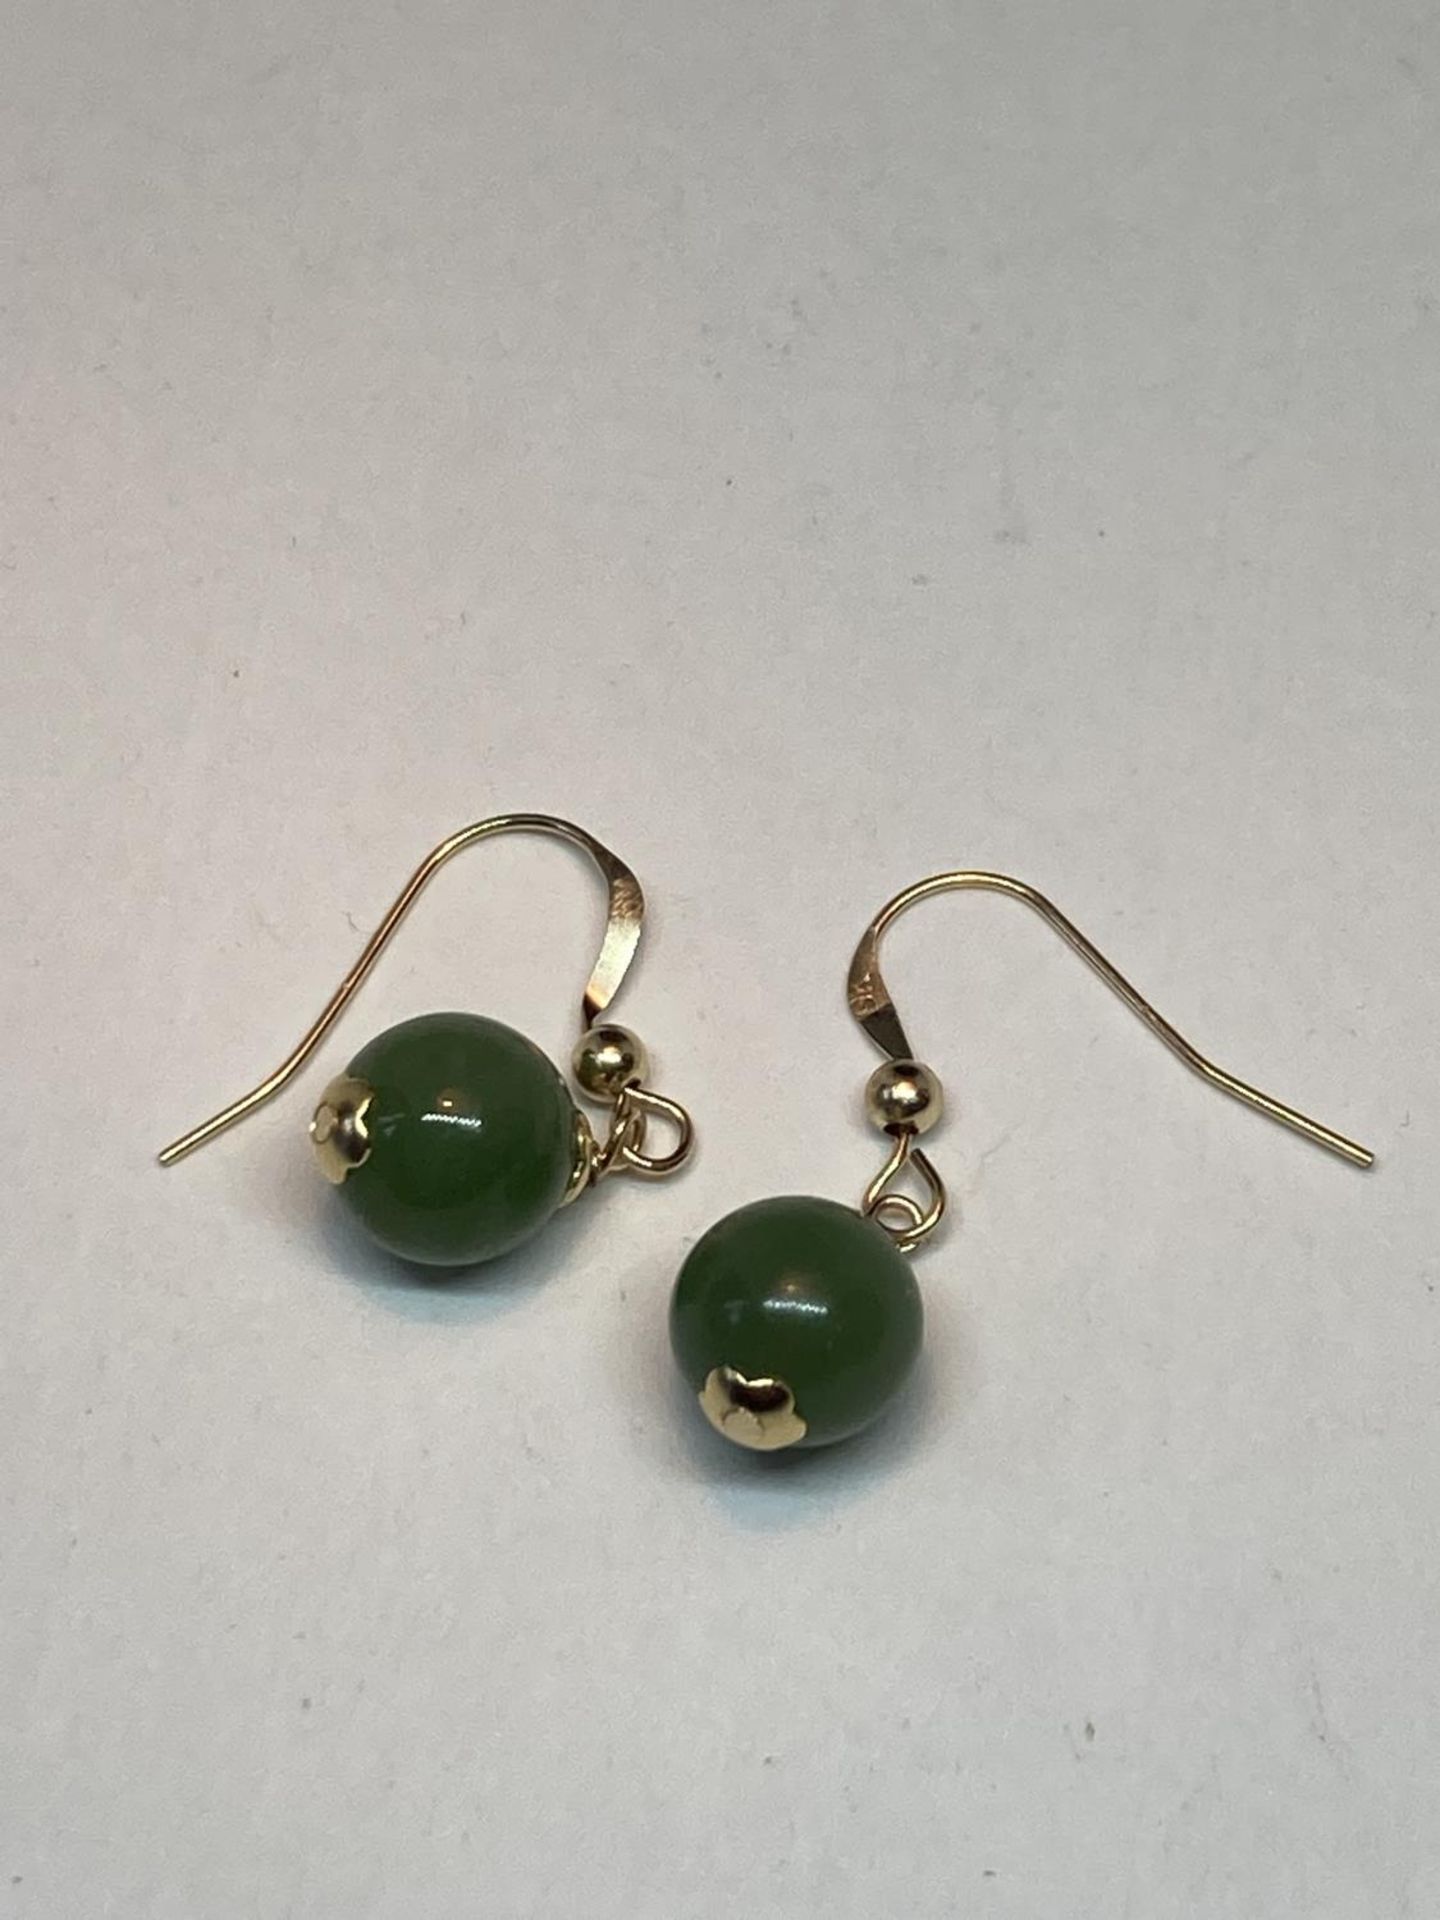 A PAIR OF MARKED 9K EARRINGS WITH GREEN CHALCEDONY STONES - Image 2 of 8